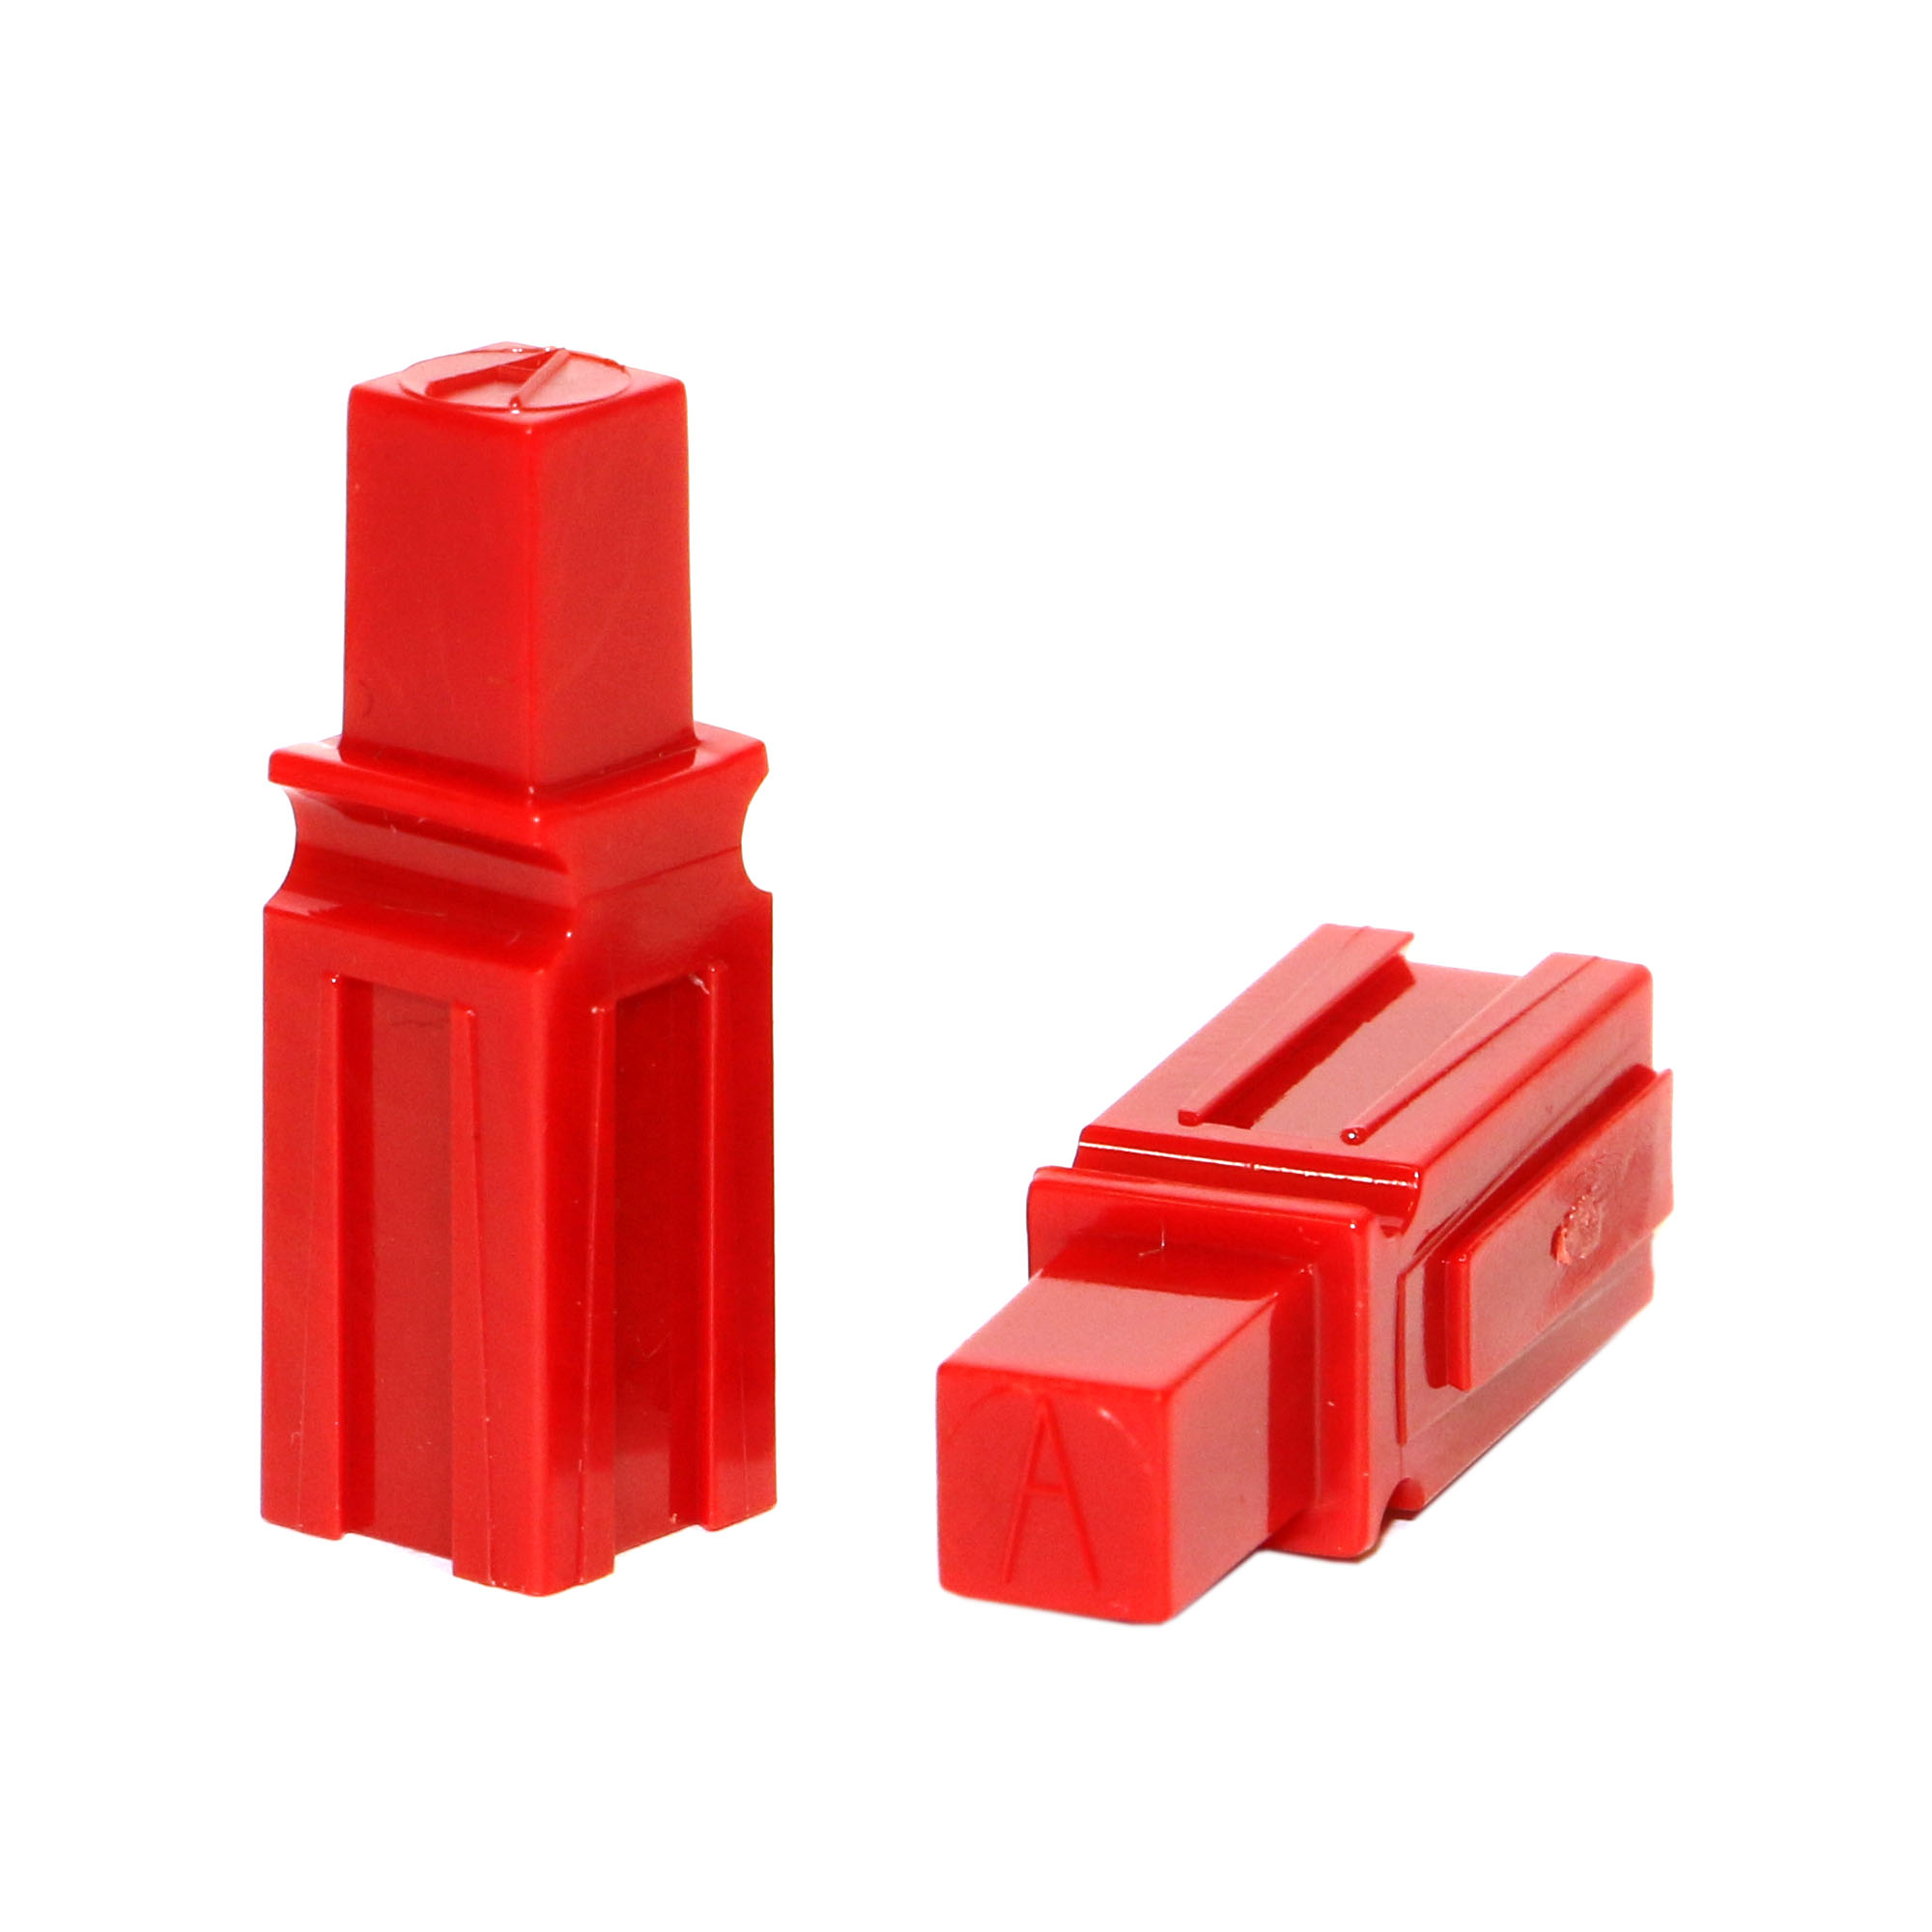 Anderson PowerPole® Abstandshalter / Spacer lang rot